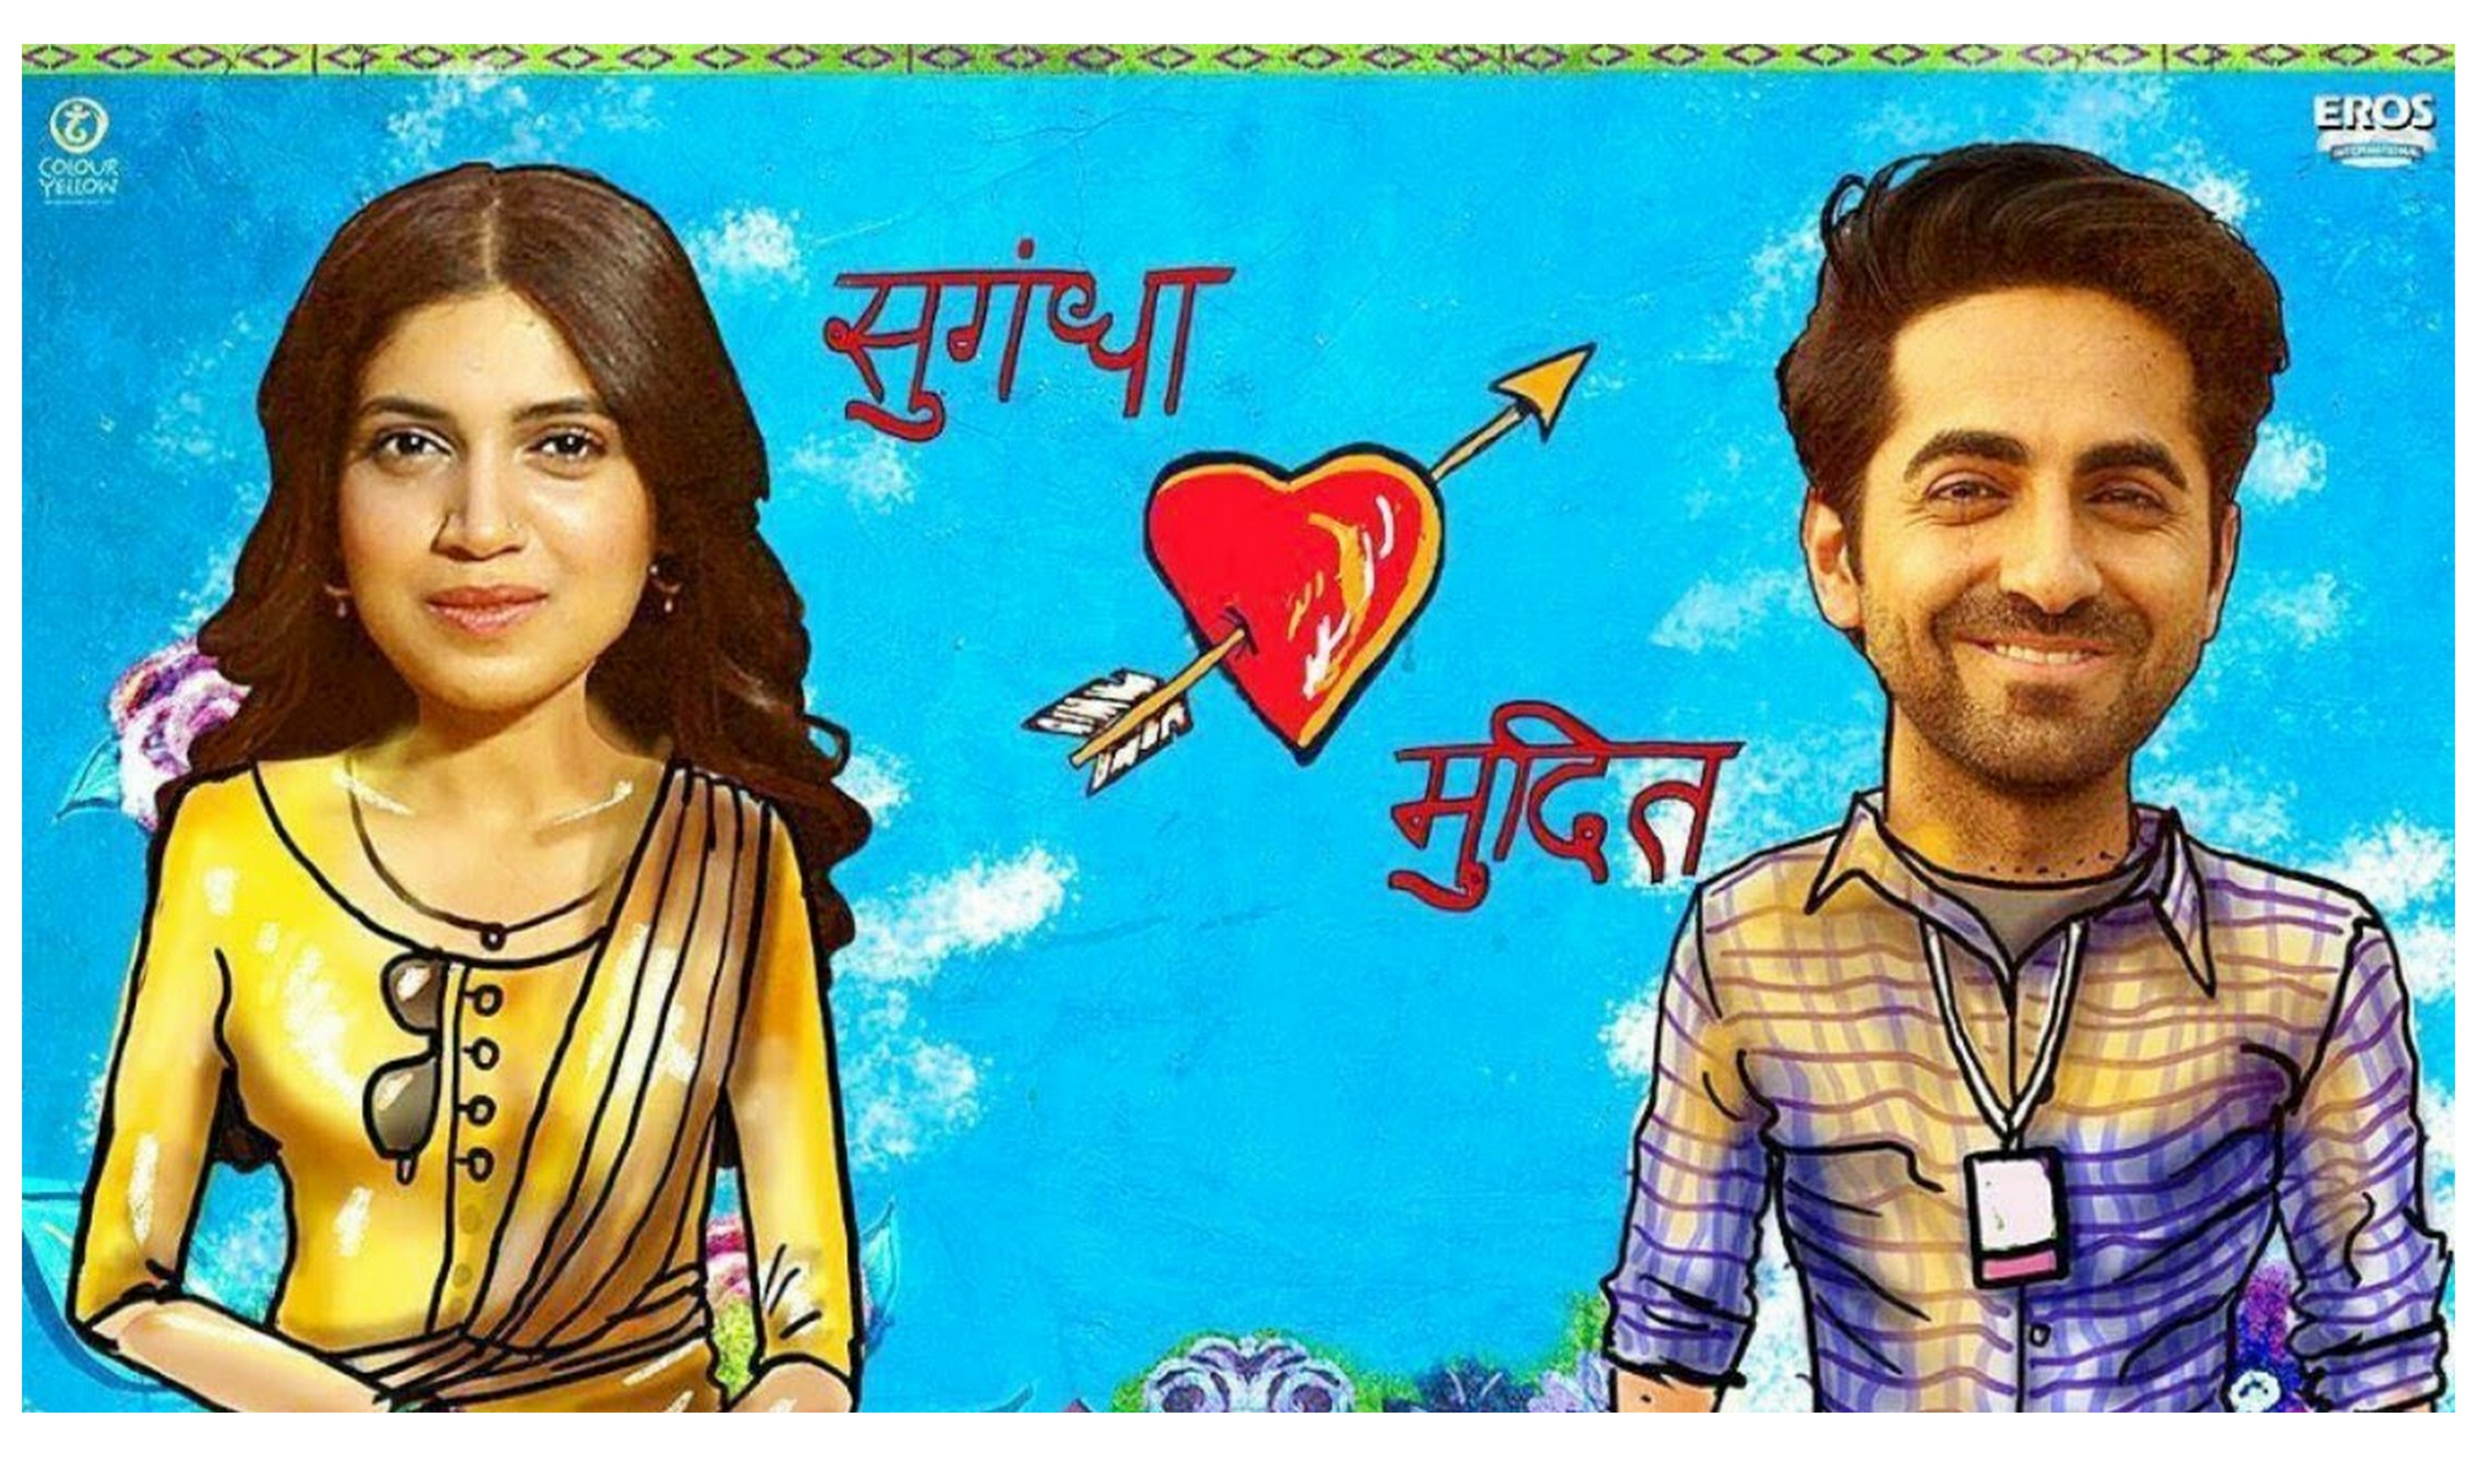 Shubh manglam saavdhan reaches to Rs 40 crore!